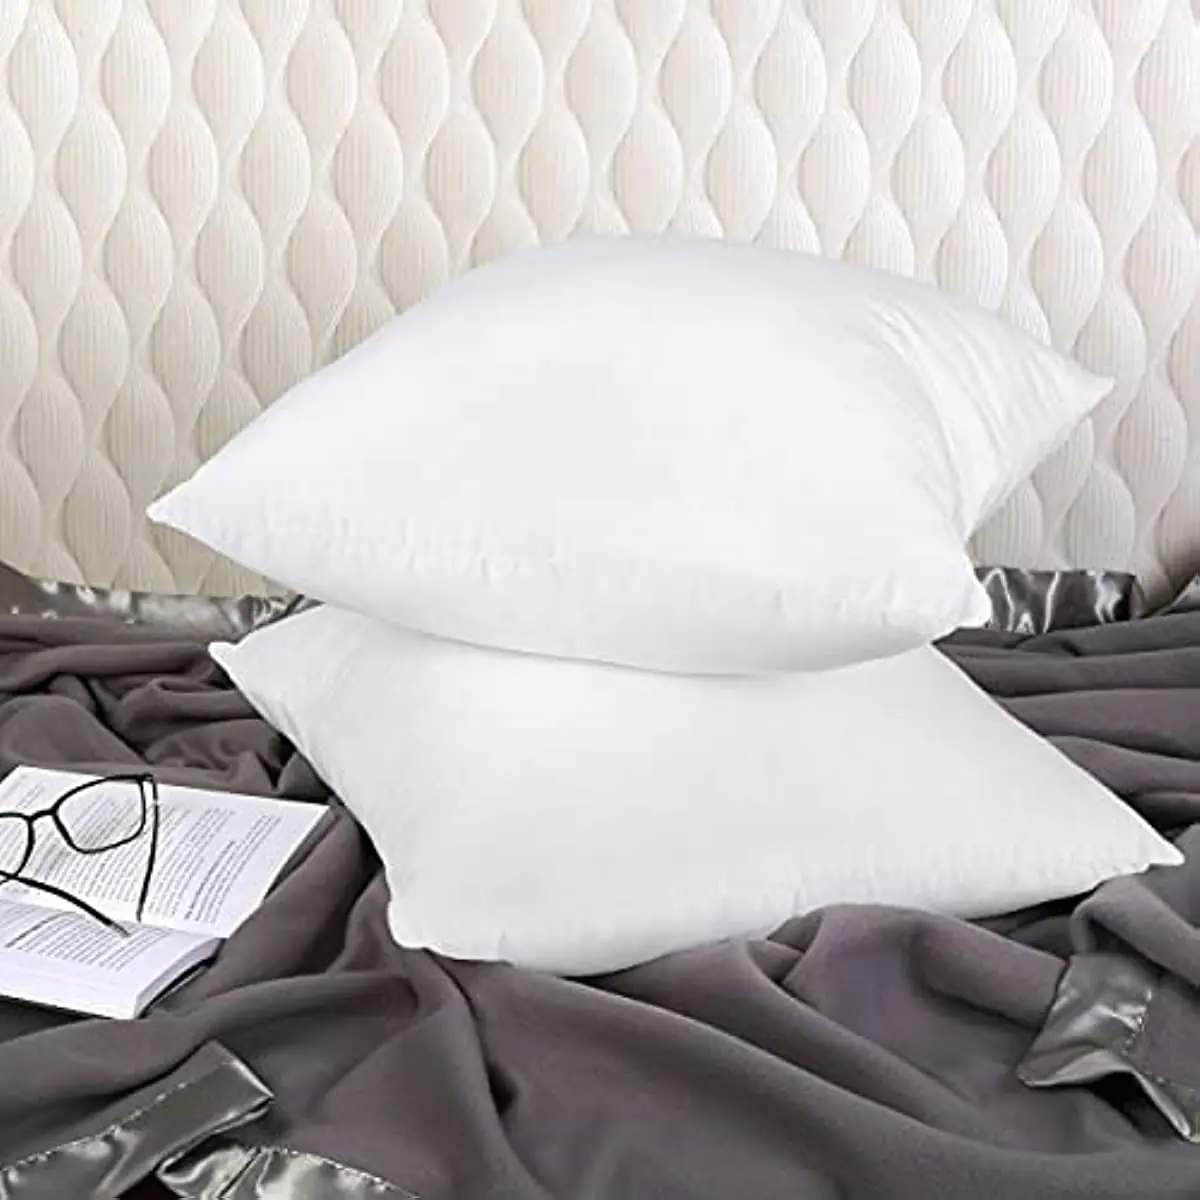 https://ae01.alicdn.com/kf/S3cdbc60b245346a4855a5fd537c22246B/Utopia-Bedding-Throw-Pillows-Insert-Pack-of-2-White-18-x-18-Inches-Bed-and-Couch.jpg